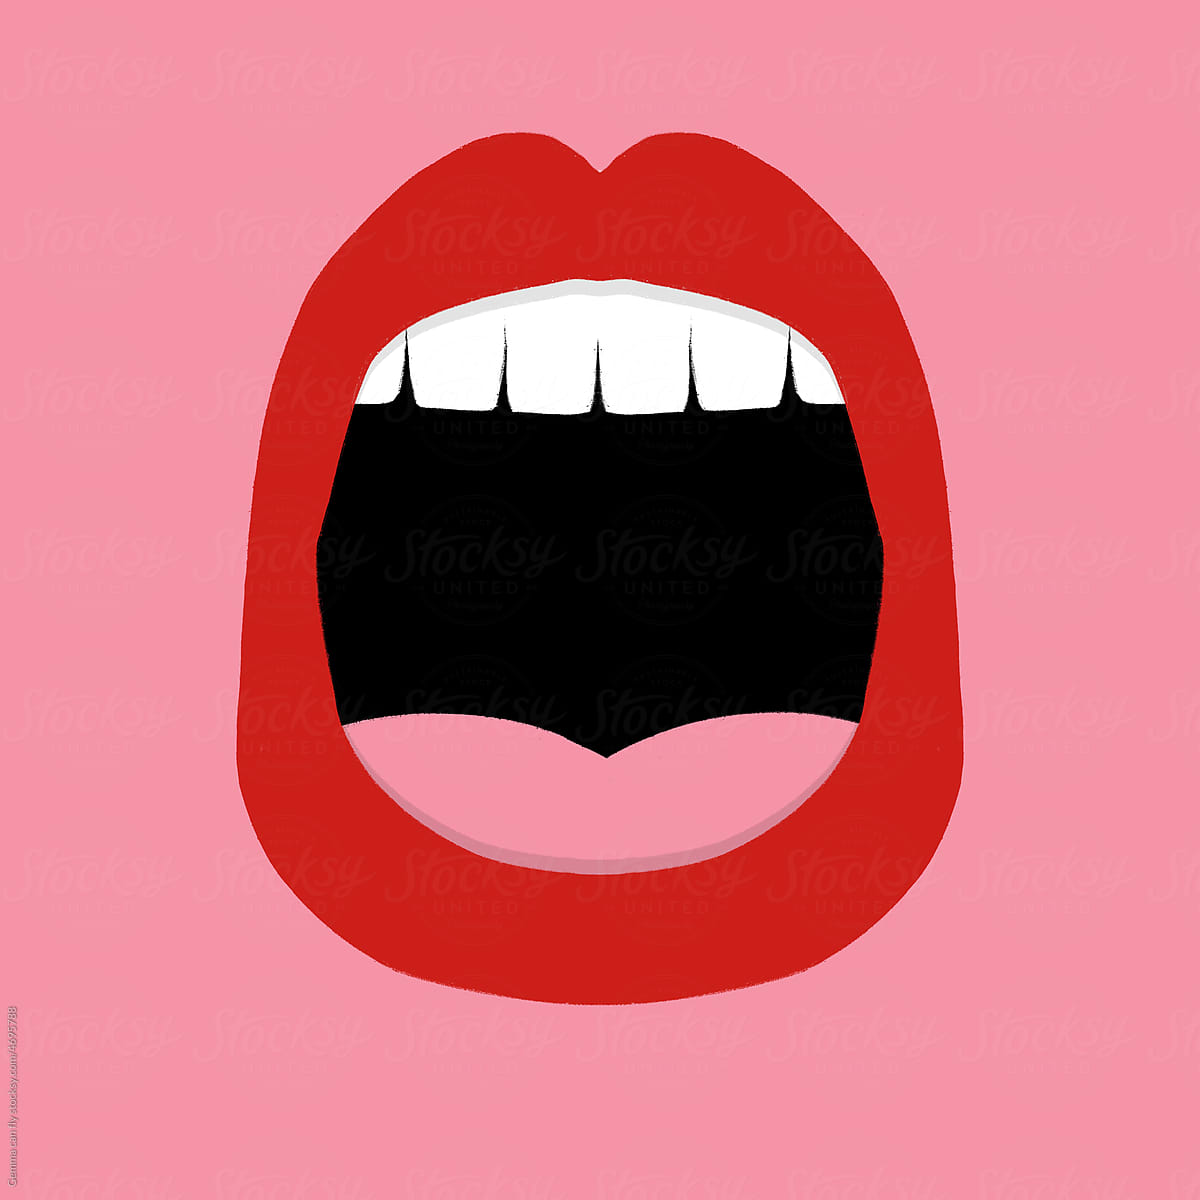 Open mouth with red lips, illustration